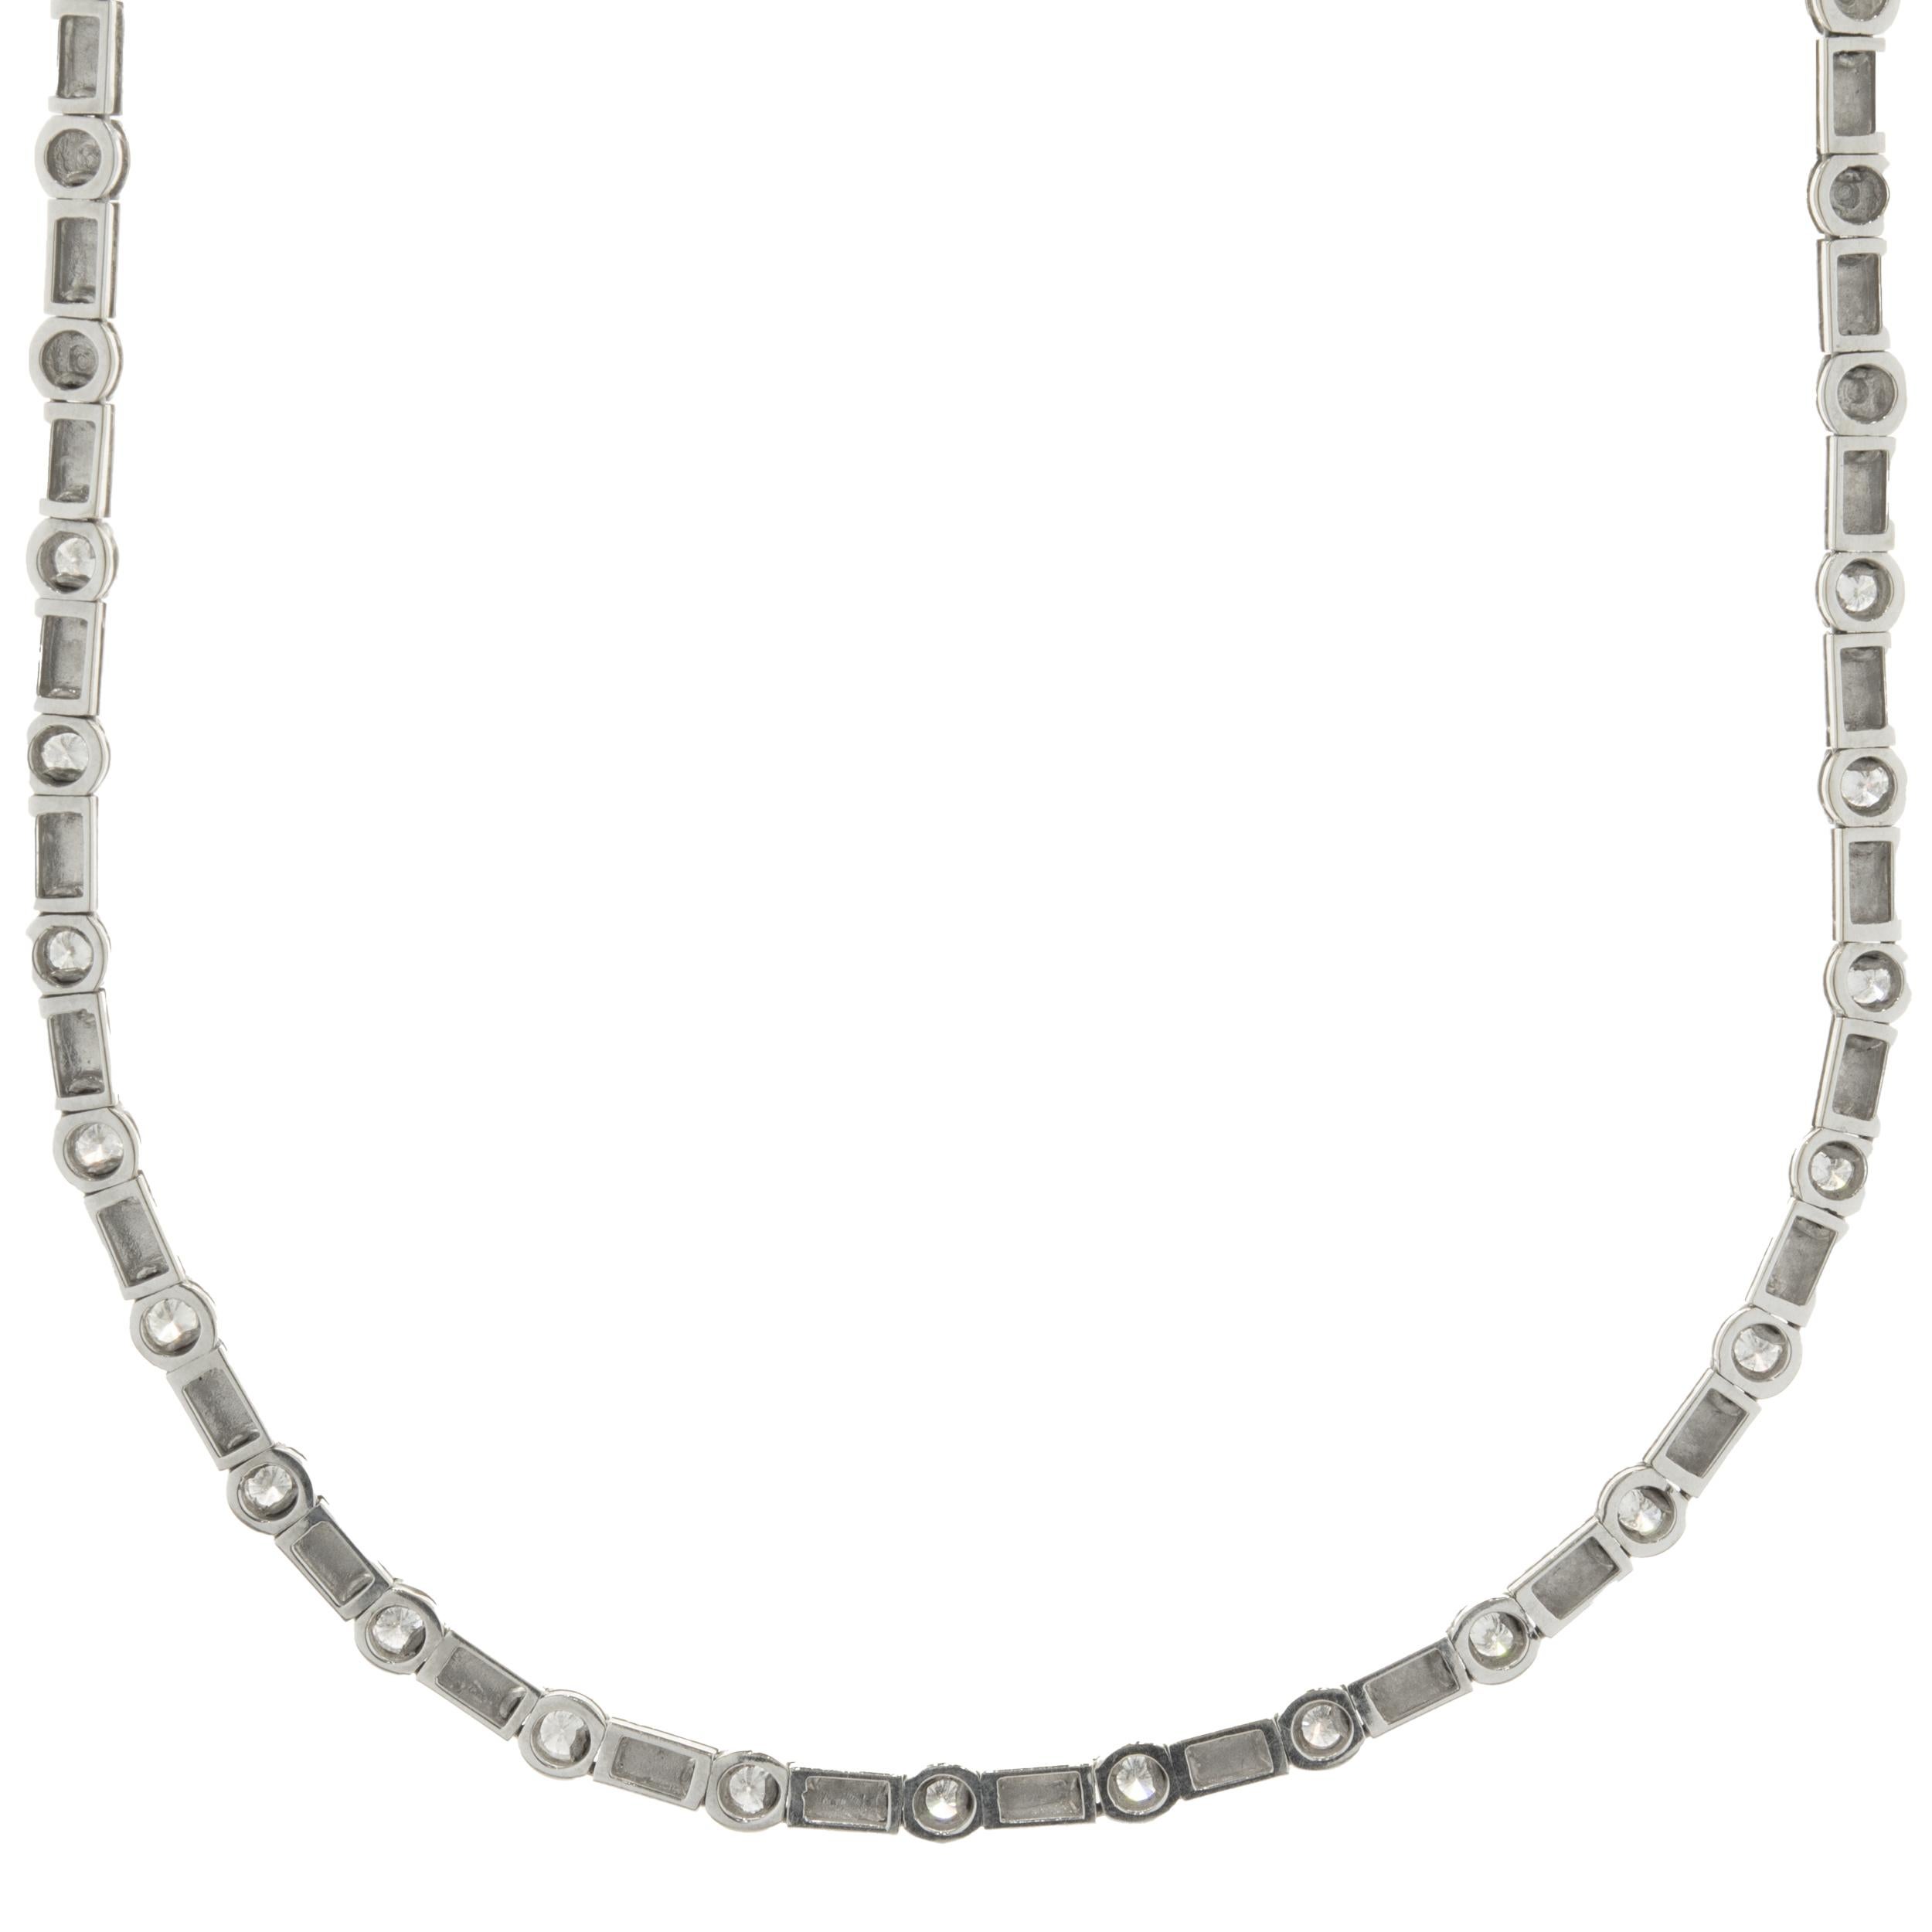 Designer: custom design
Material: 18K white gold
Diamonds: 19 round brilliant cut = 1.90cttw
Color: G 
Clarity: SI1
Dimensions: necklace measures 18-inches in length 
Weight: 33.44 grams